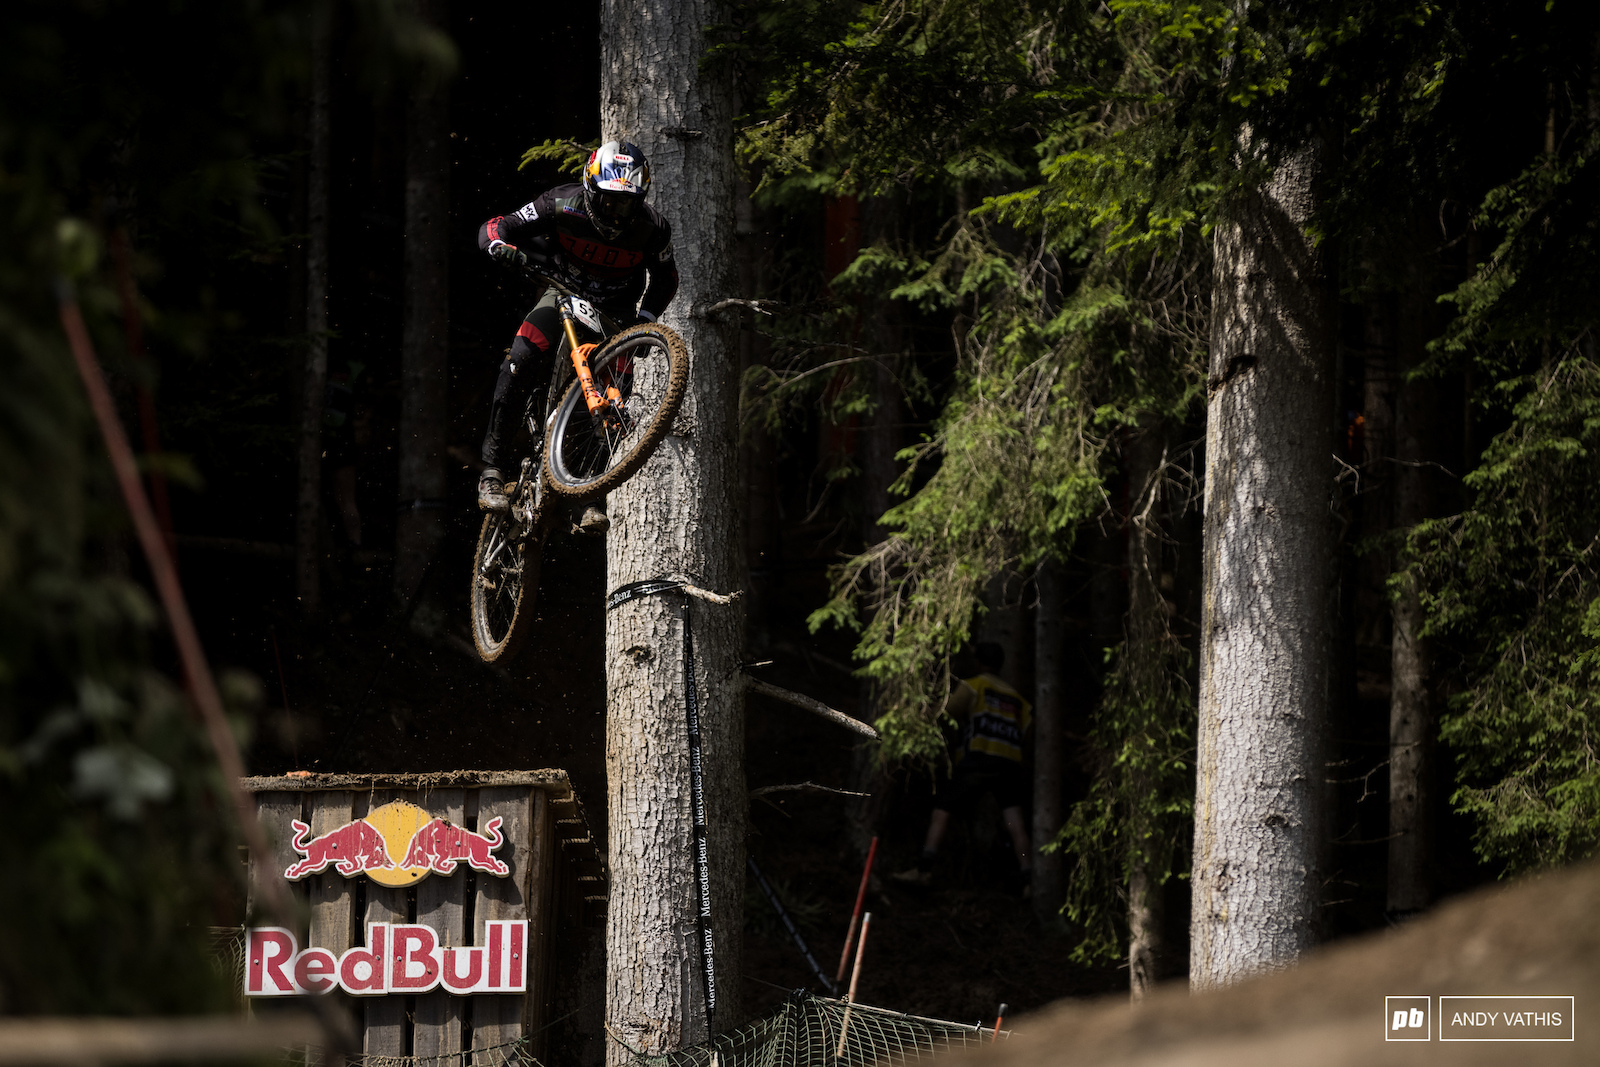 Aaron Gwin is back in the mix. A couple of 11th s makes for a good week in Leogang.